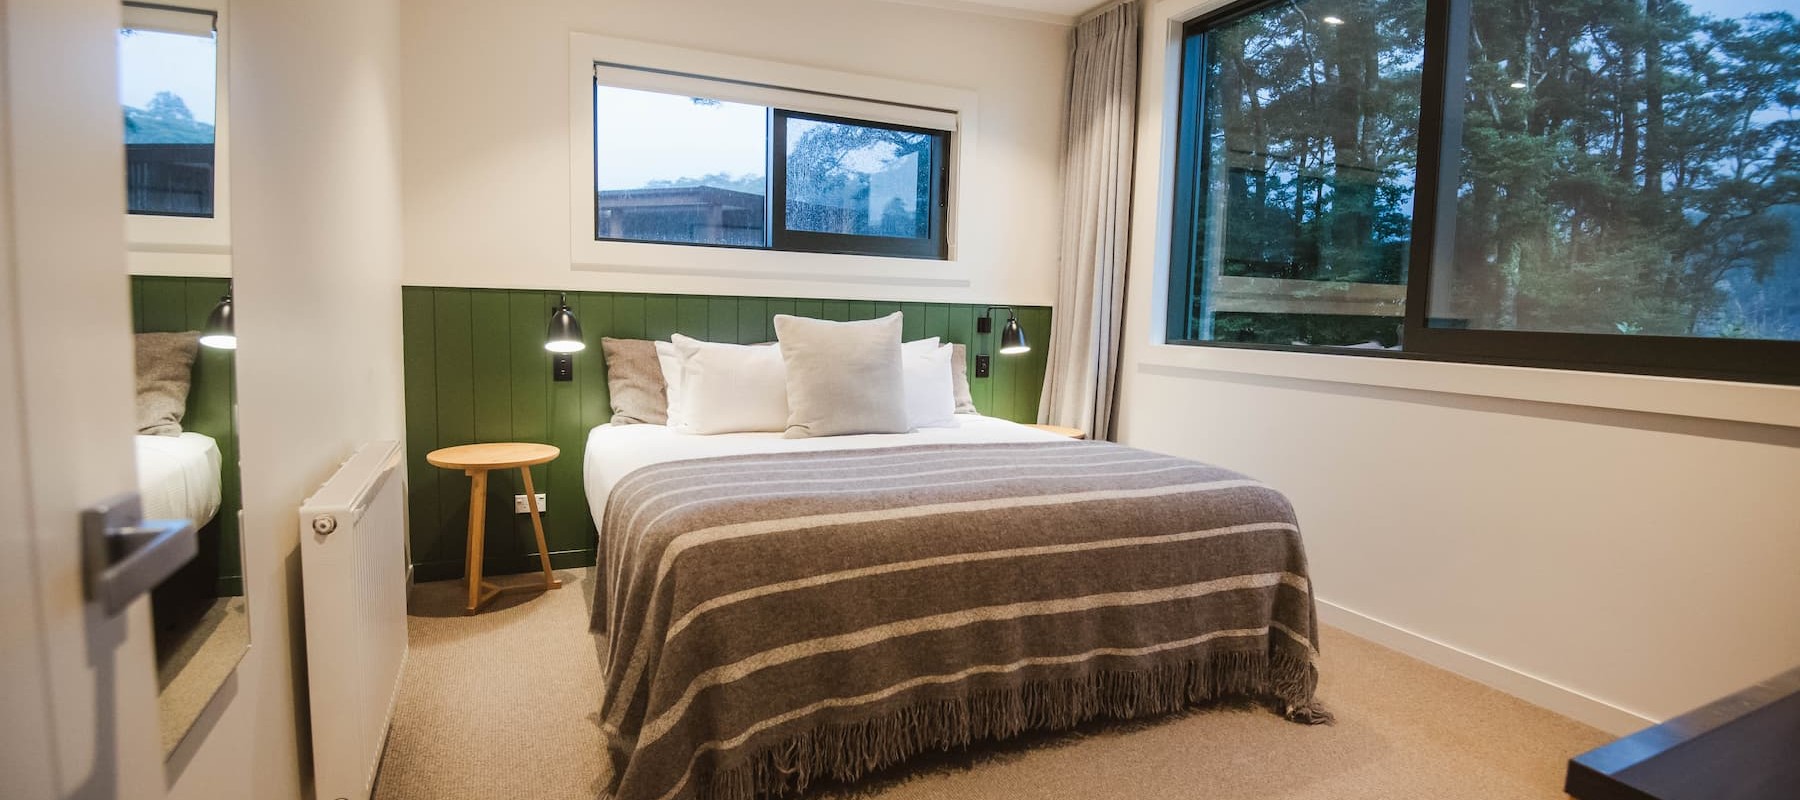 A 2-Bedroom Garden Chalet bedroom at Milford Sound Lodge, Milford Sound accommodation.